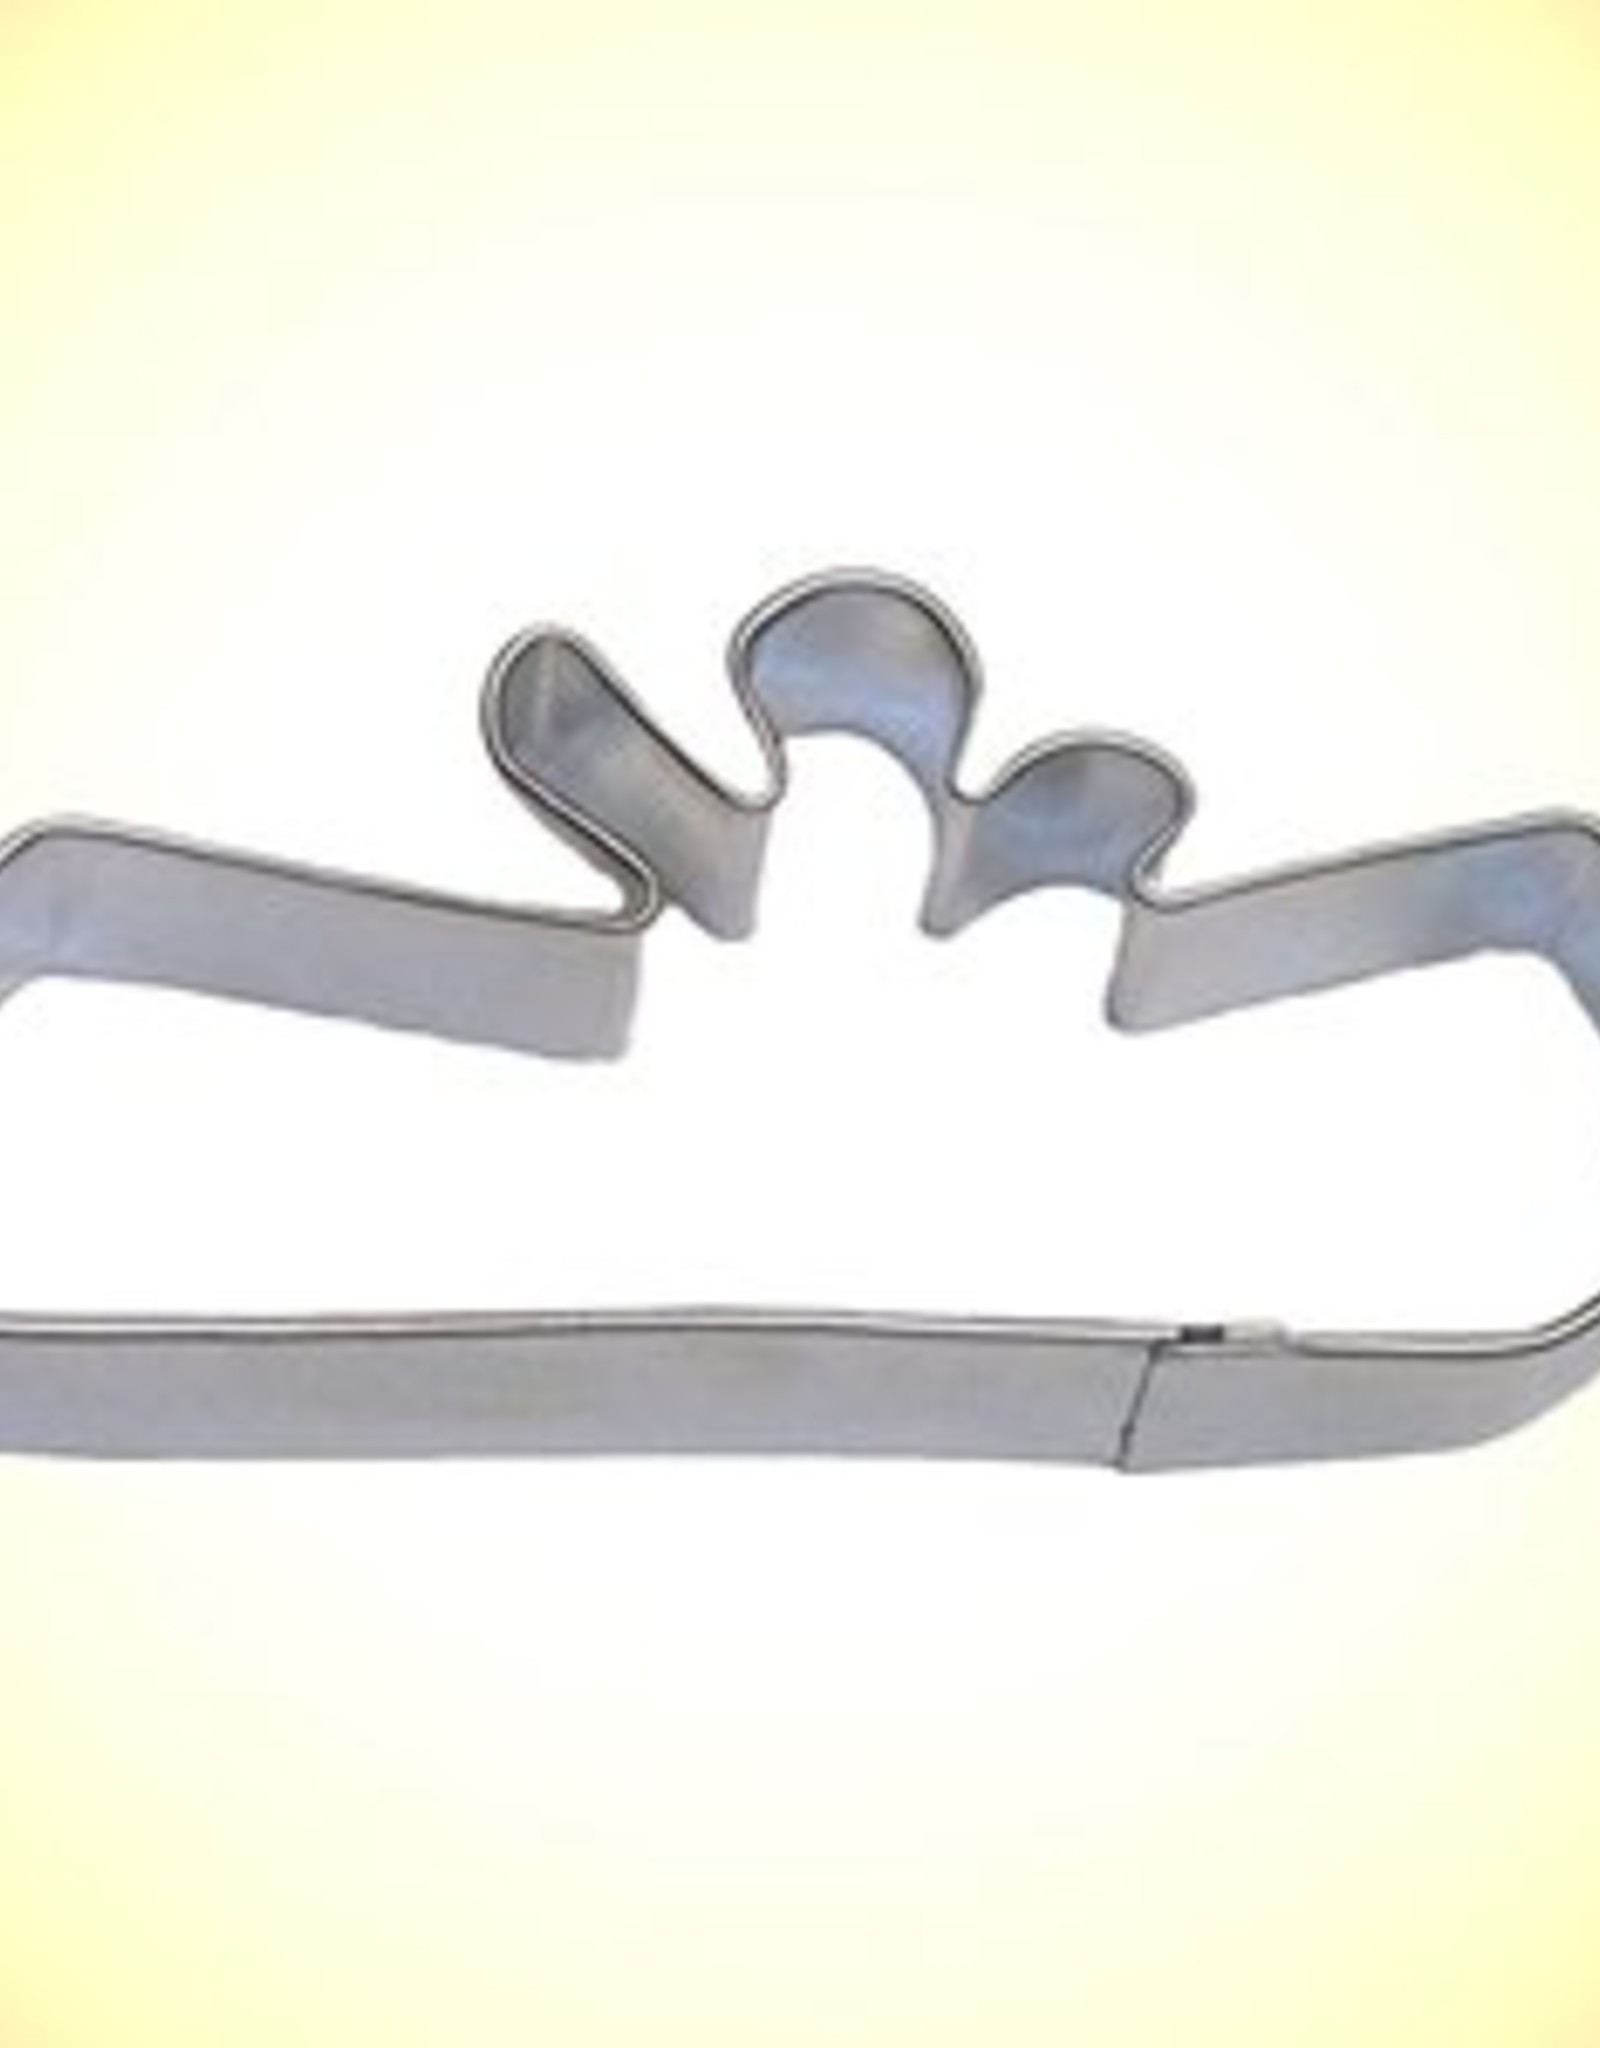 Diploma (4") Cookie Cutter